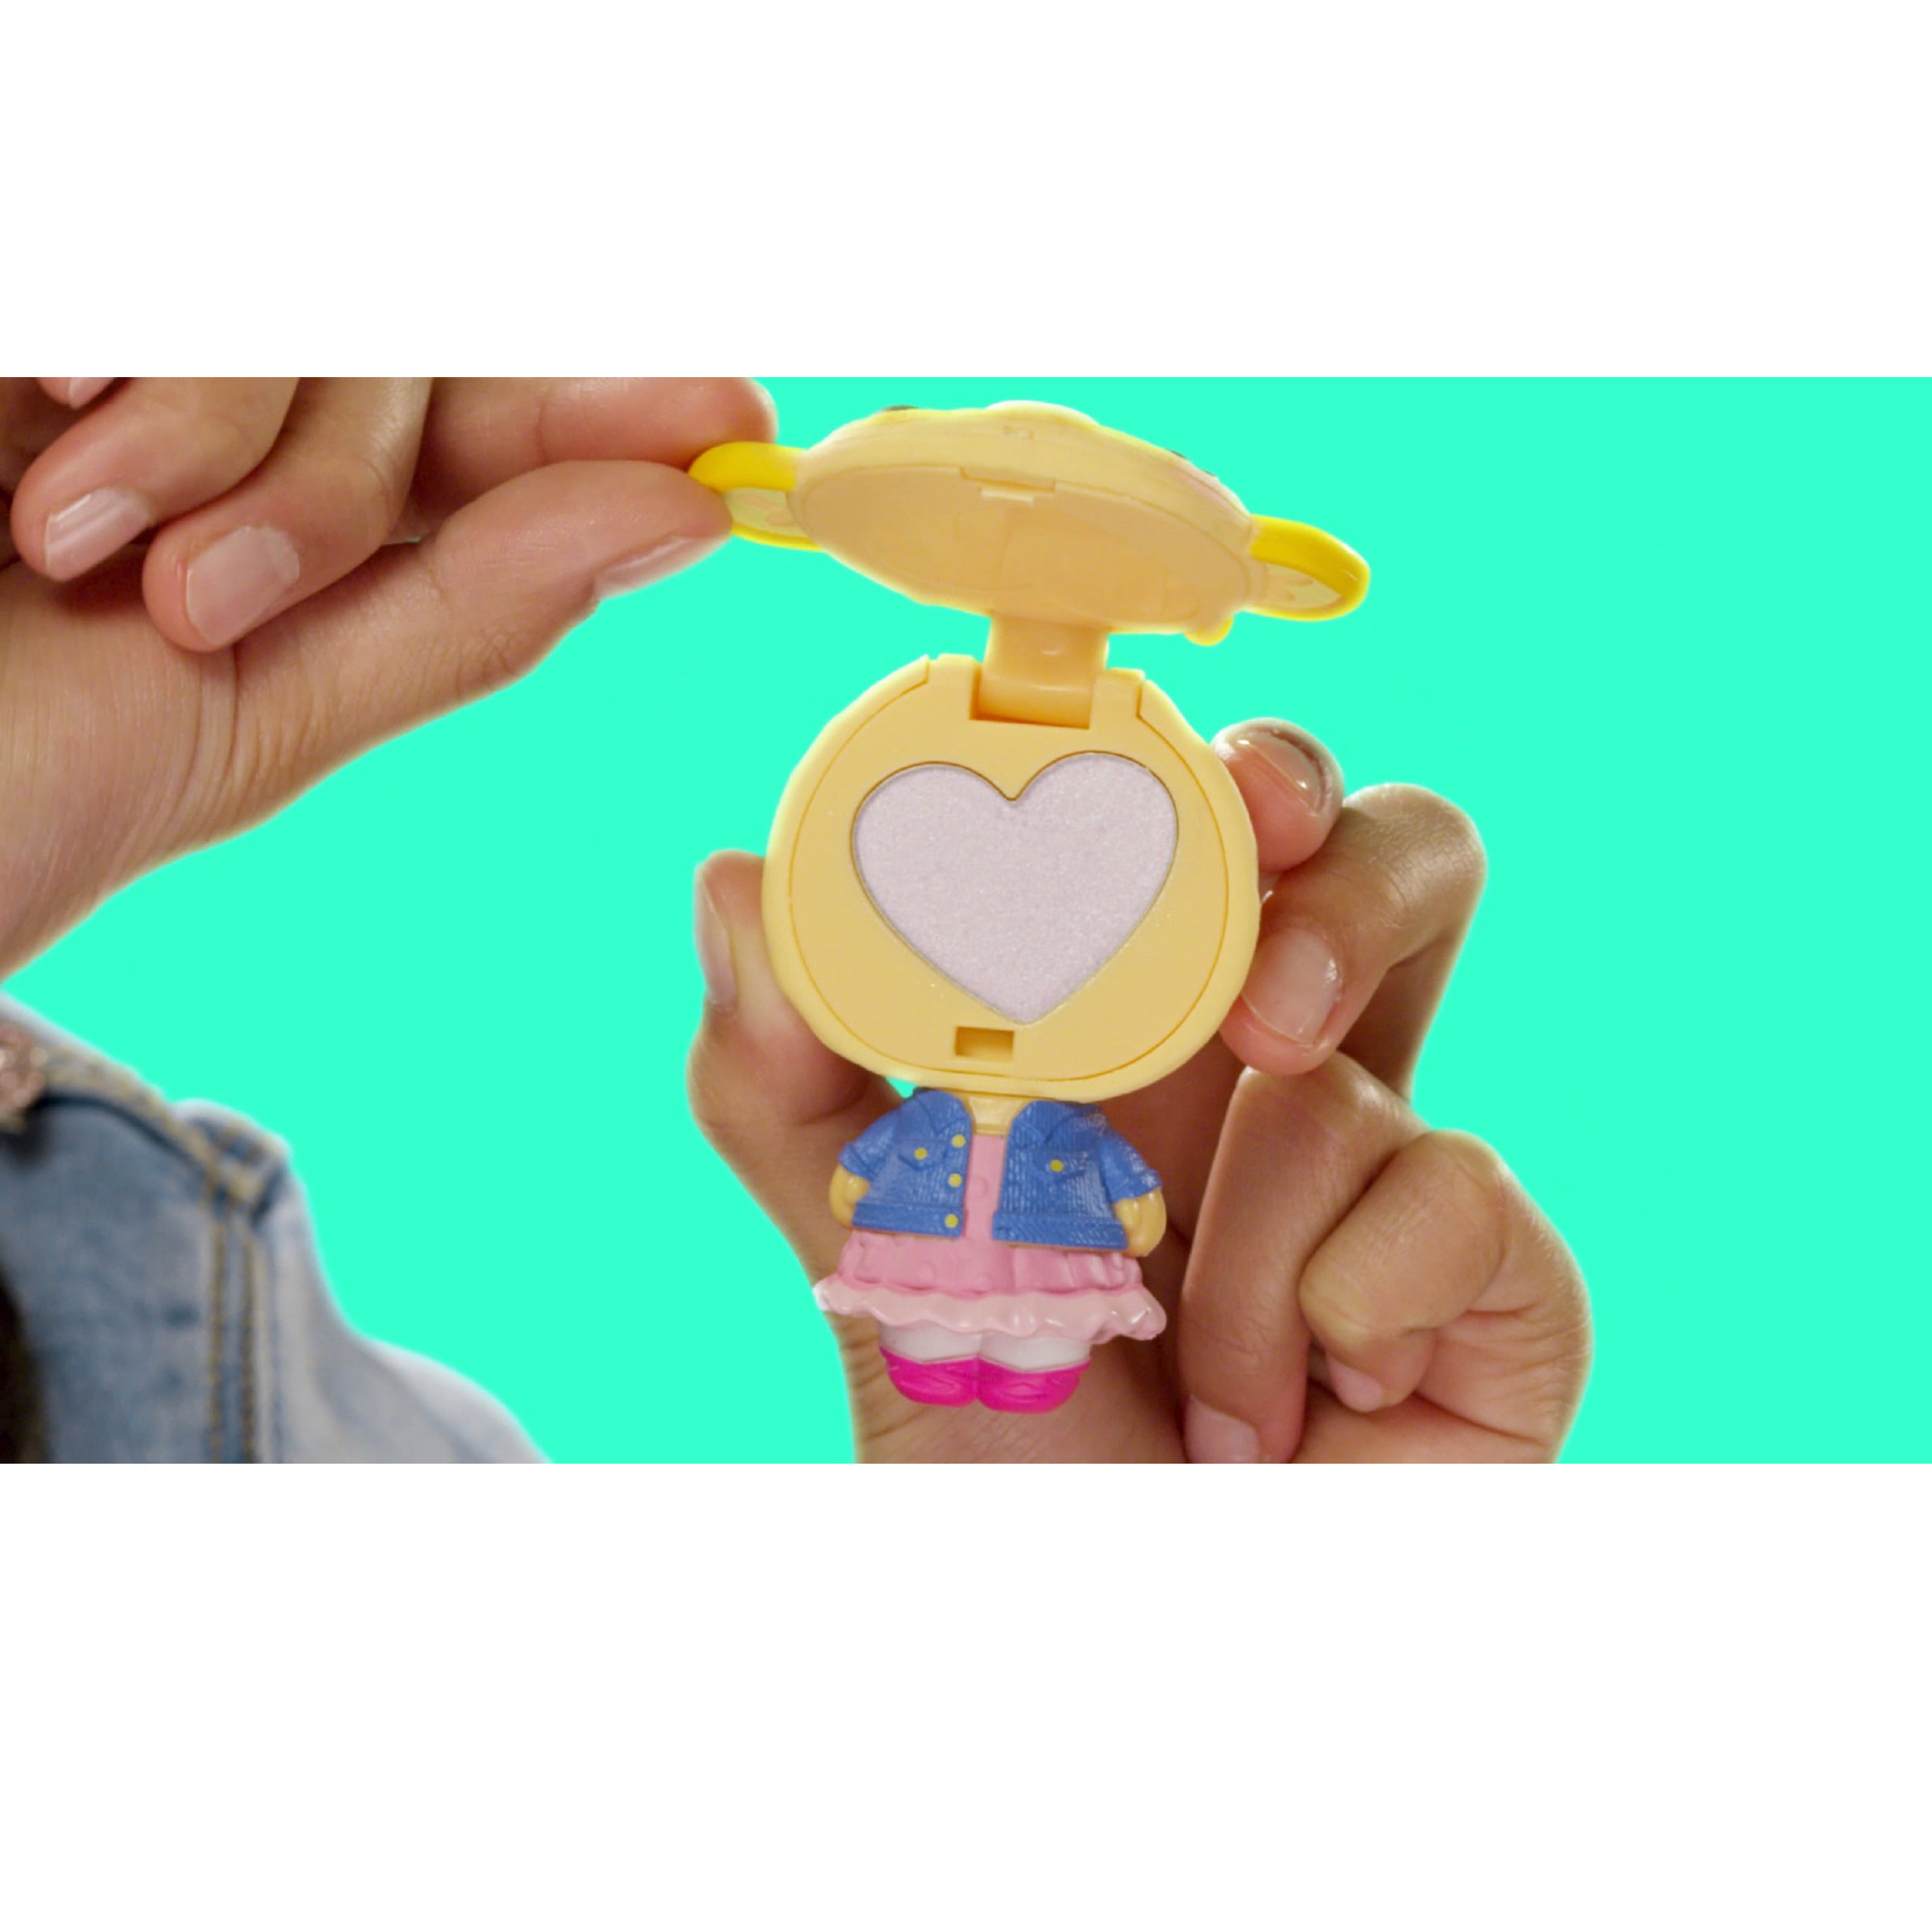  Num Noms Mystery Makeup with Hidden Cosmetics Inside,  Multicolor : Toys & Games